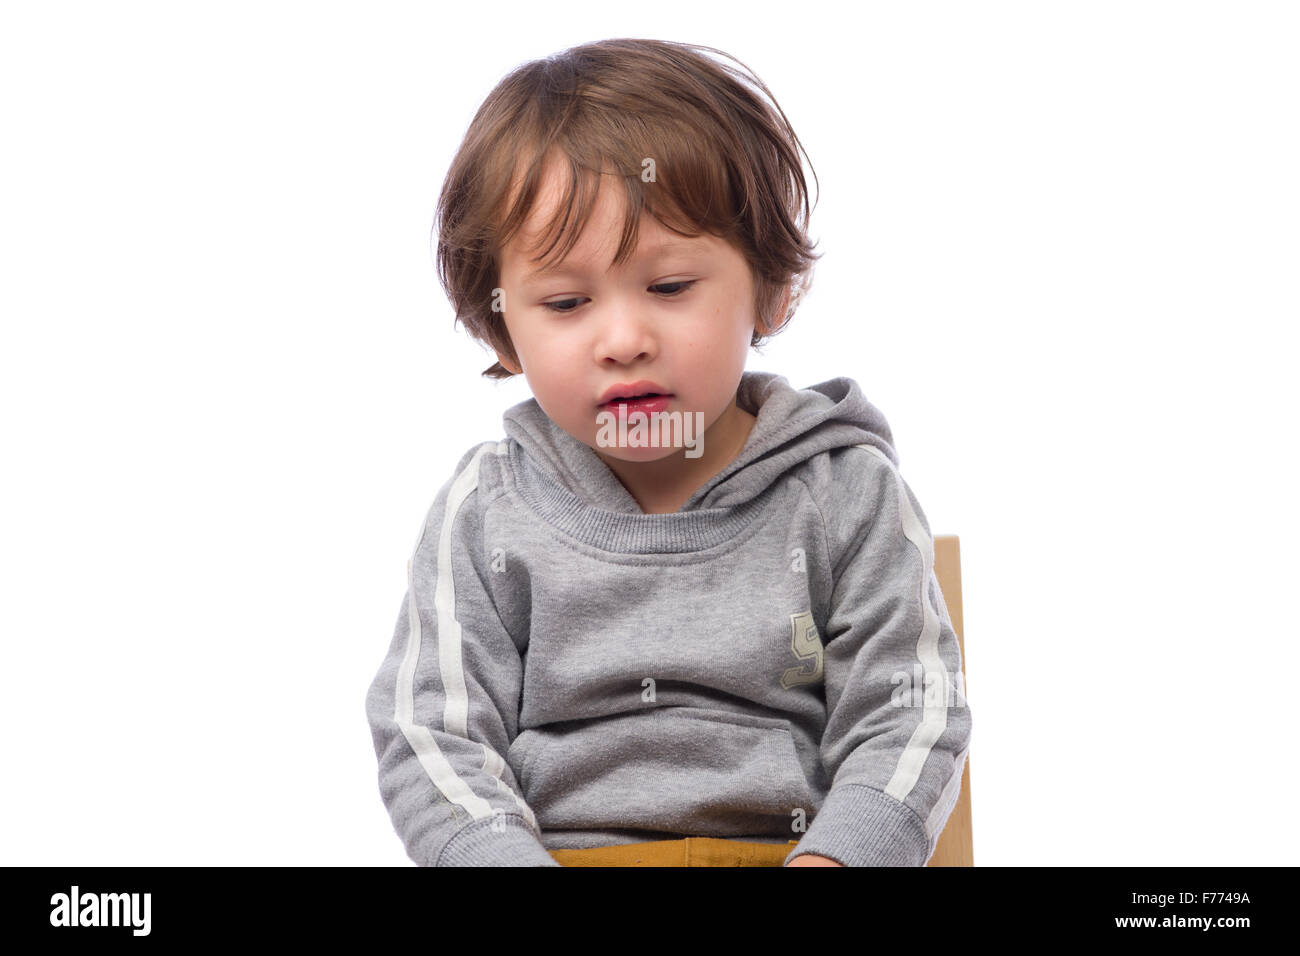 A cute 3 year old boy with a sad expression on a white background. Stock Photo